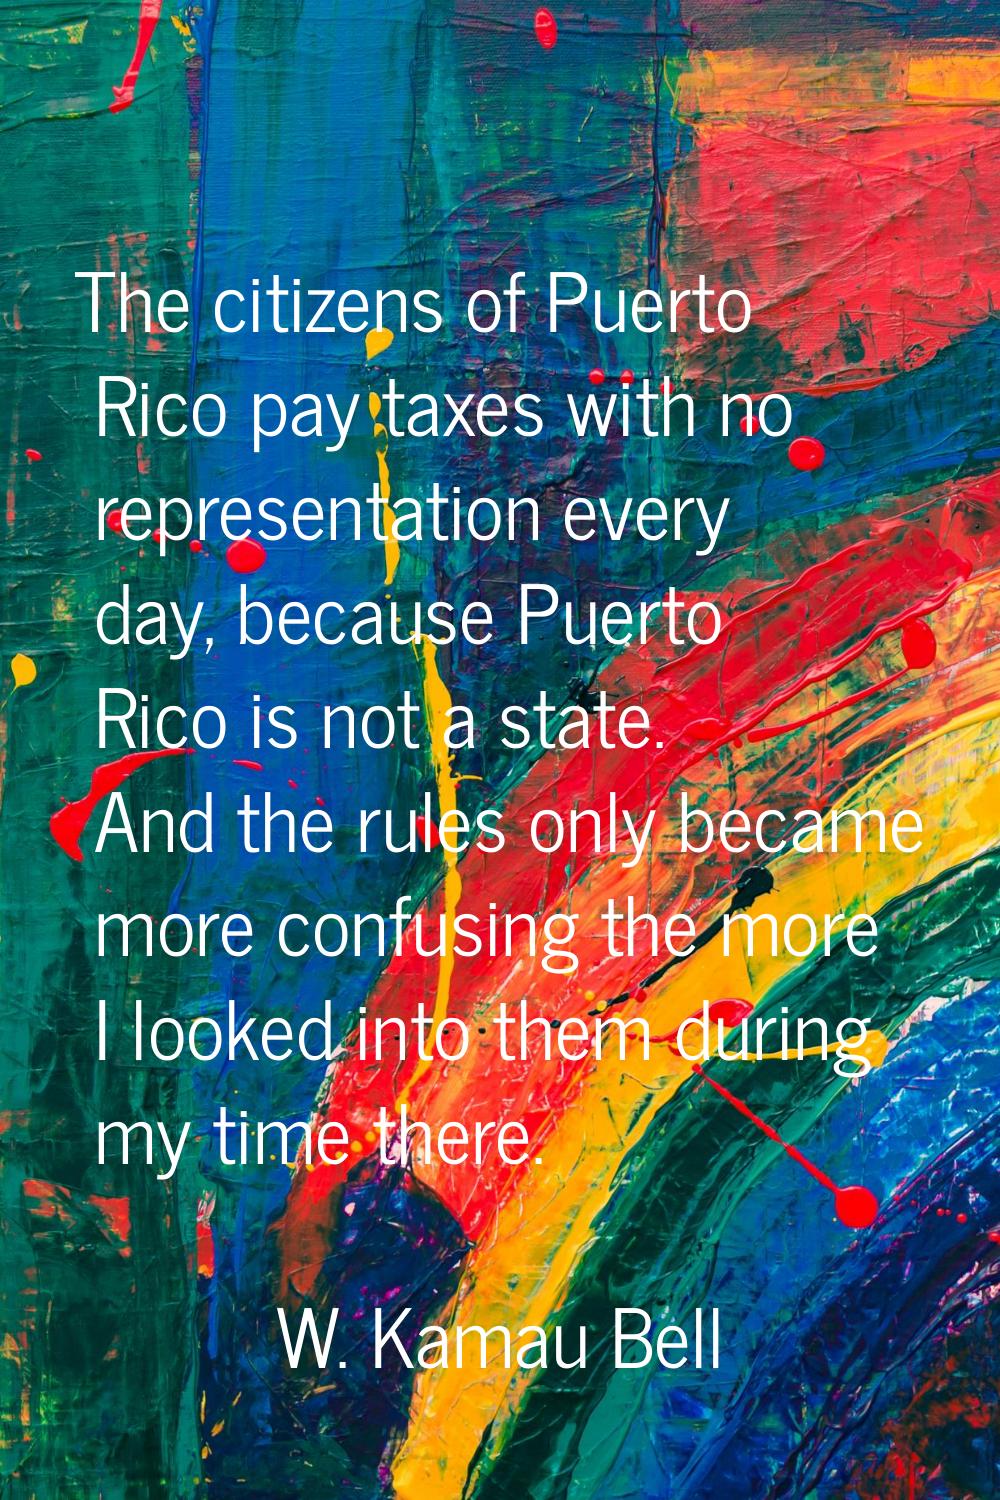 The citizens of Puerto Rico pay taxes with no representation every day, because Puerto Rico is not 